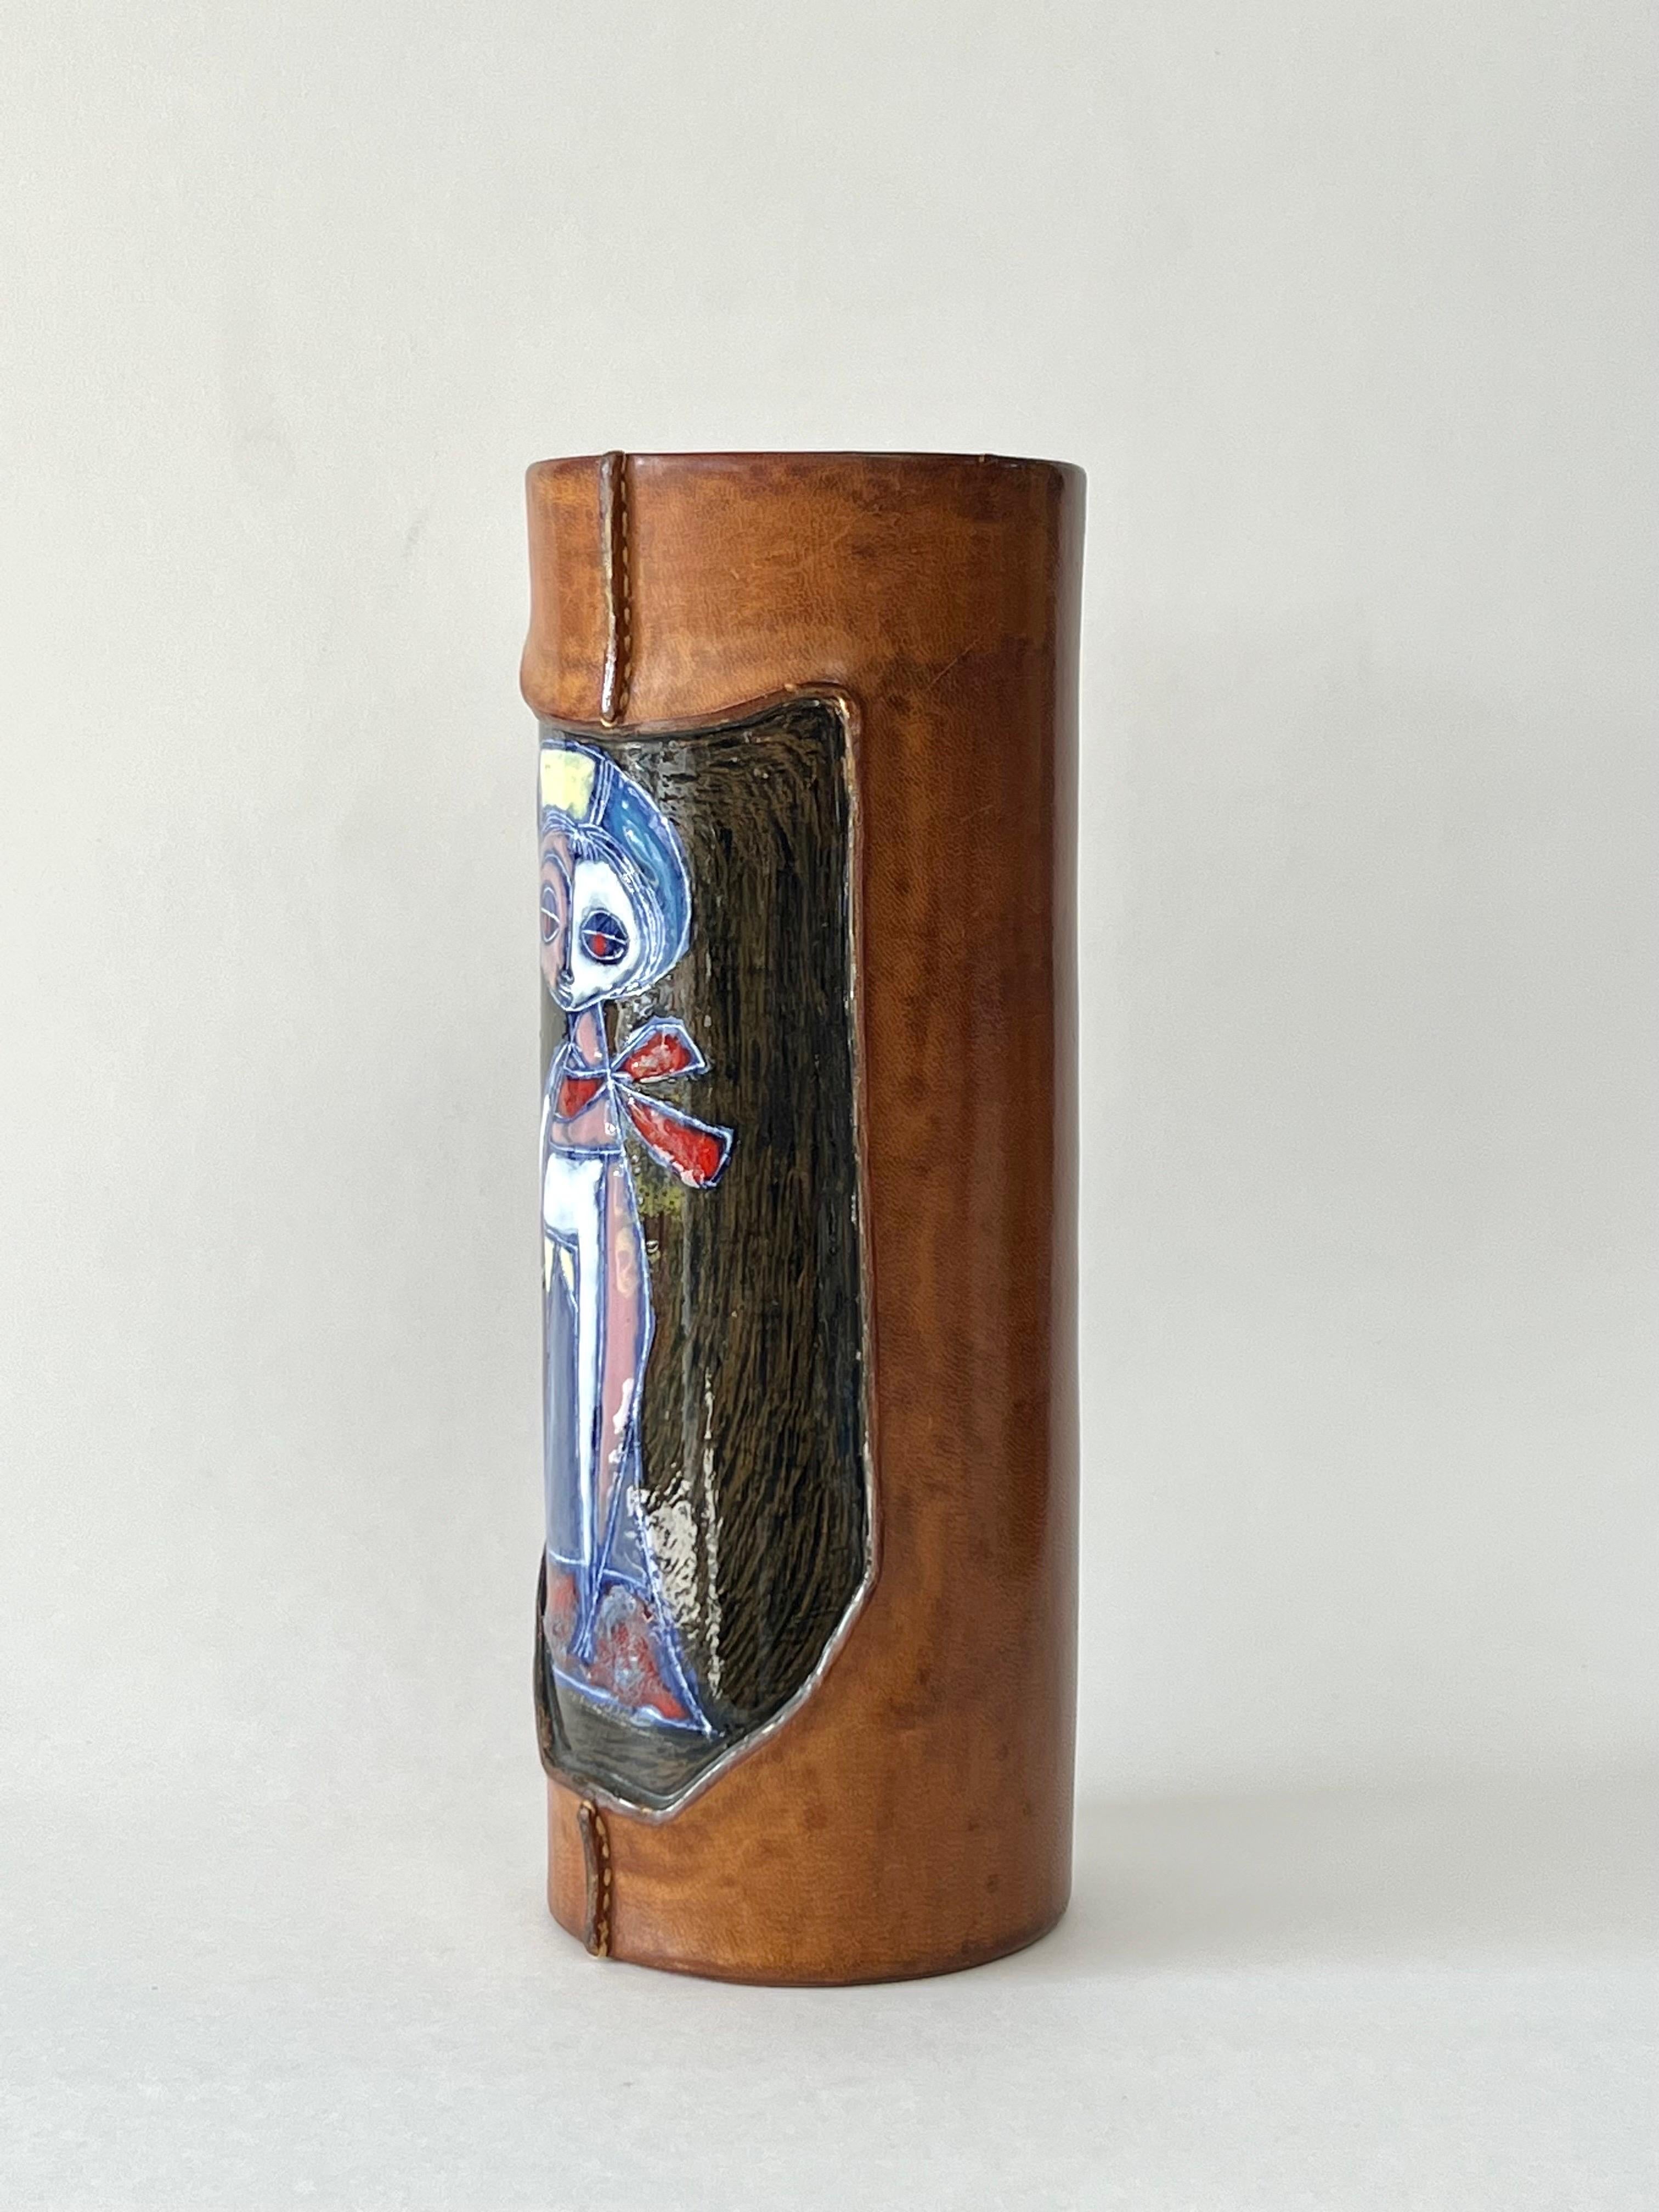 A cylindrical vase by Marcello Fantoni. 
It is ceramic partially enveloped in leather. The leather creates a reveal for a stylish woman to appear looking out directly at the viewer. Signed on bottom.